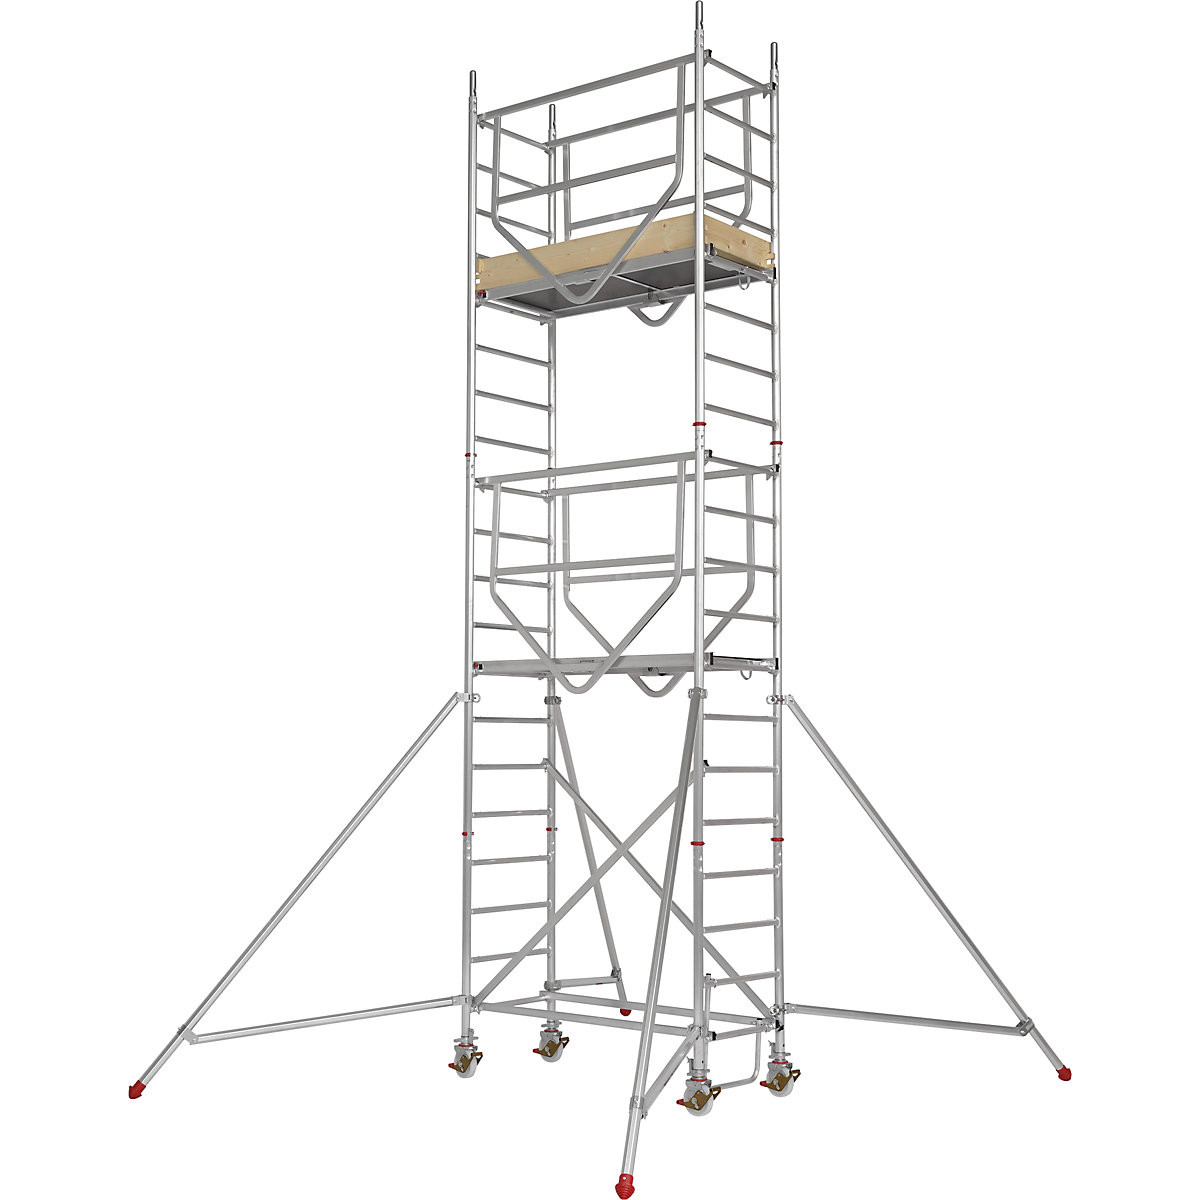 ADVANCED SAFE-T 7070 mobile access tower – HYMER, welded, platform 1.58 x 0.61 m, module 1+2+kit-4